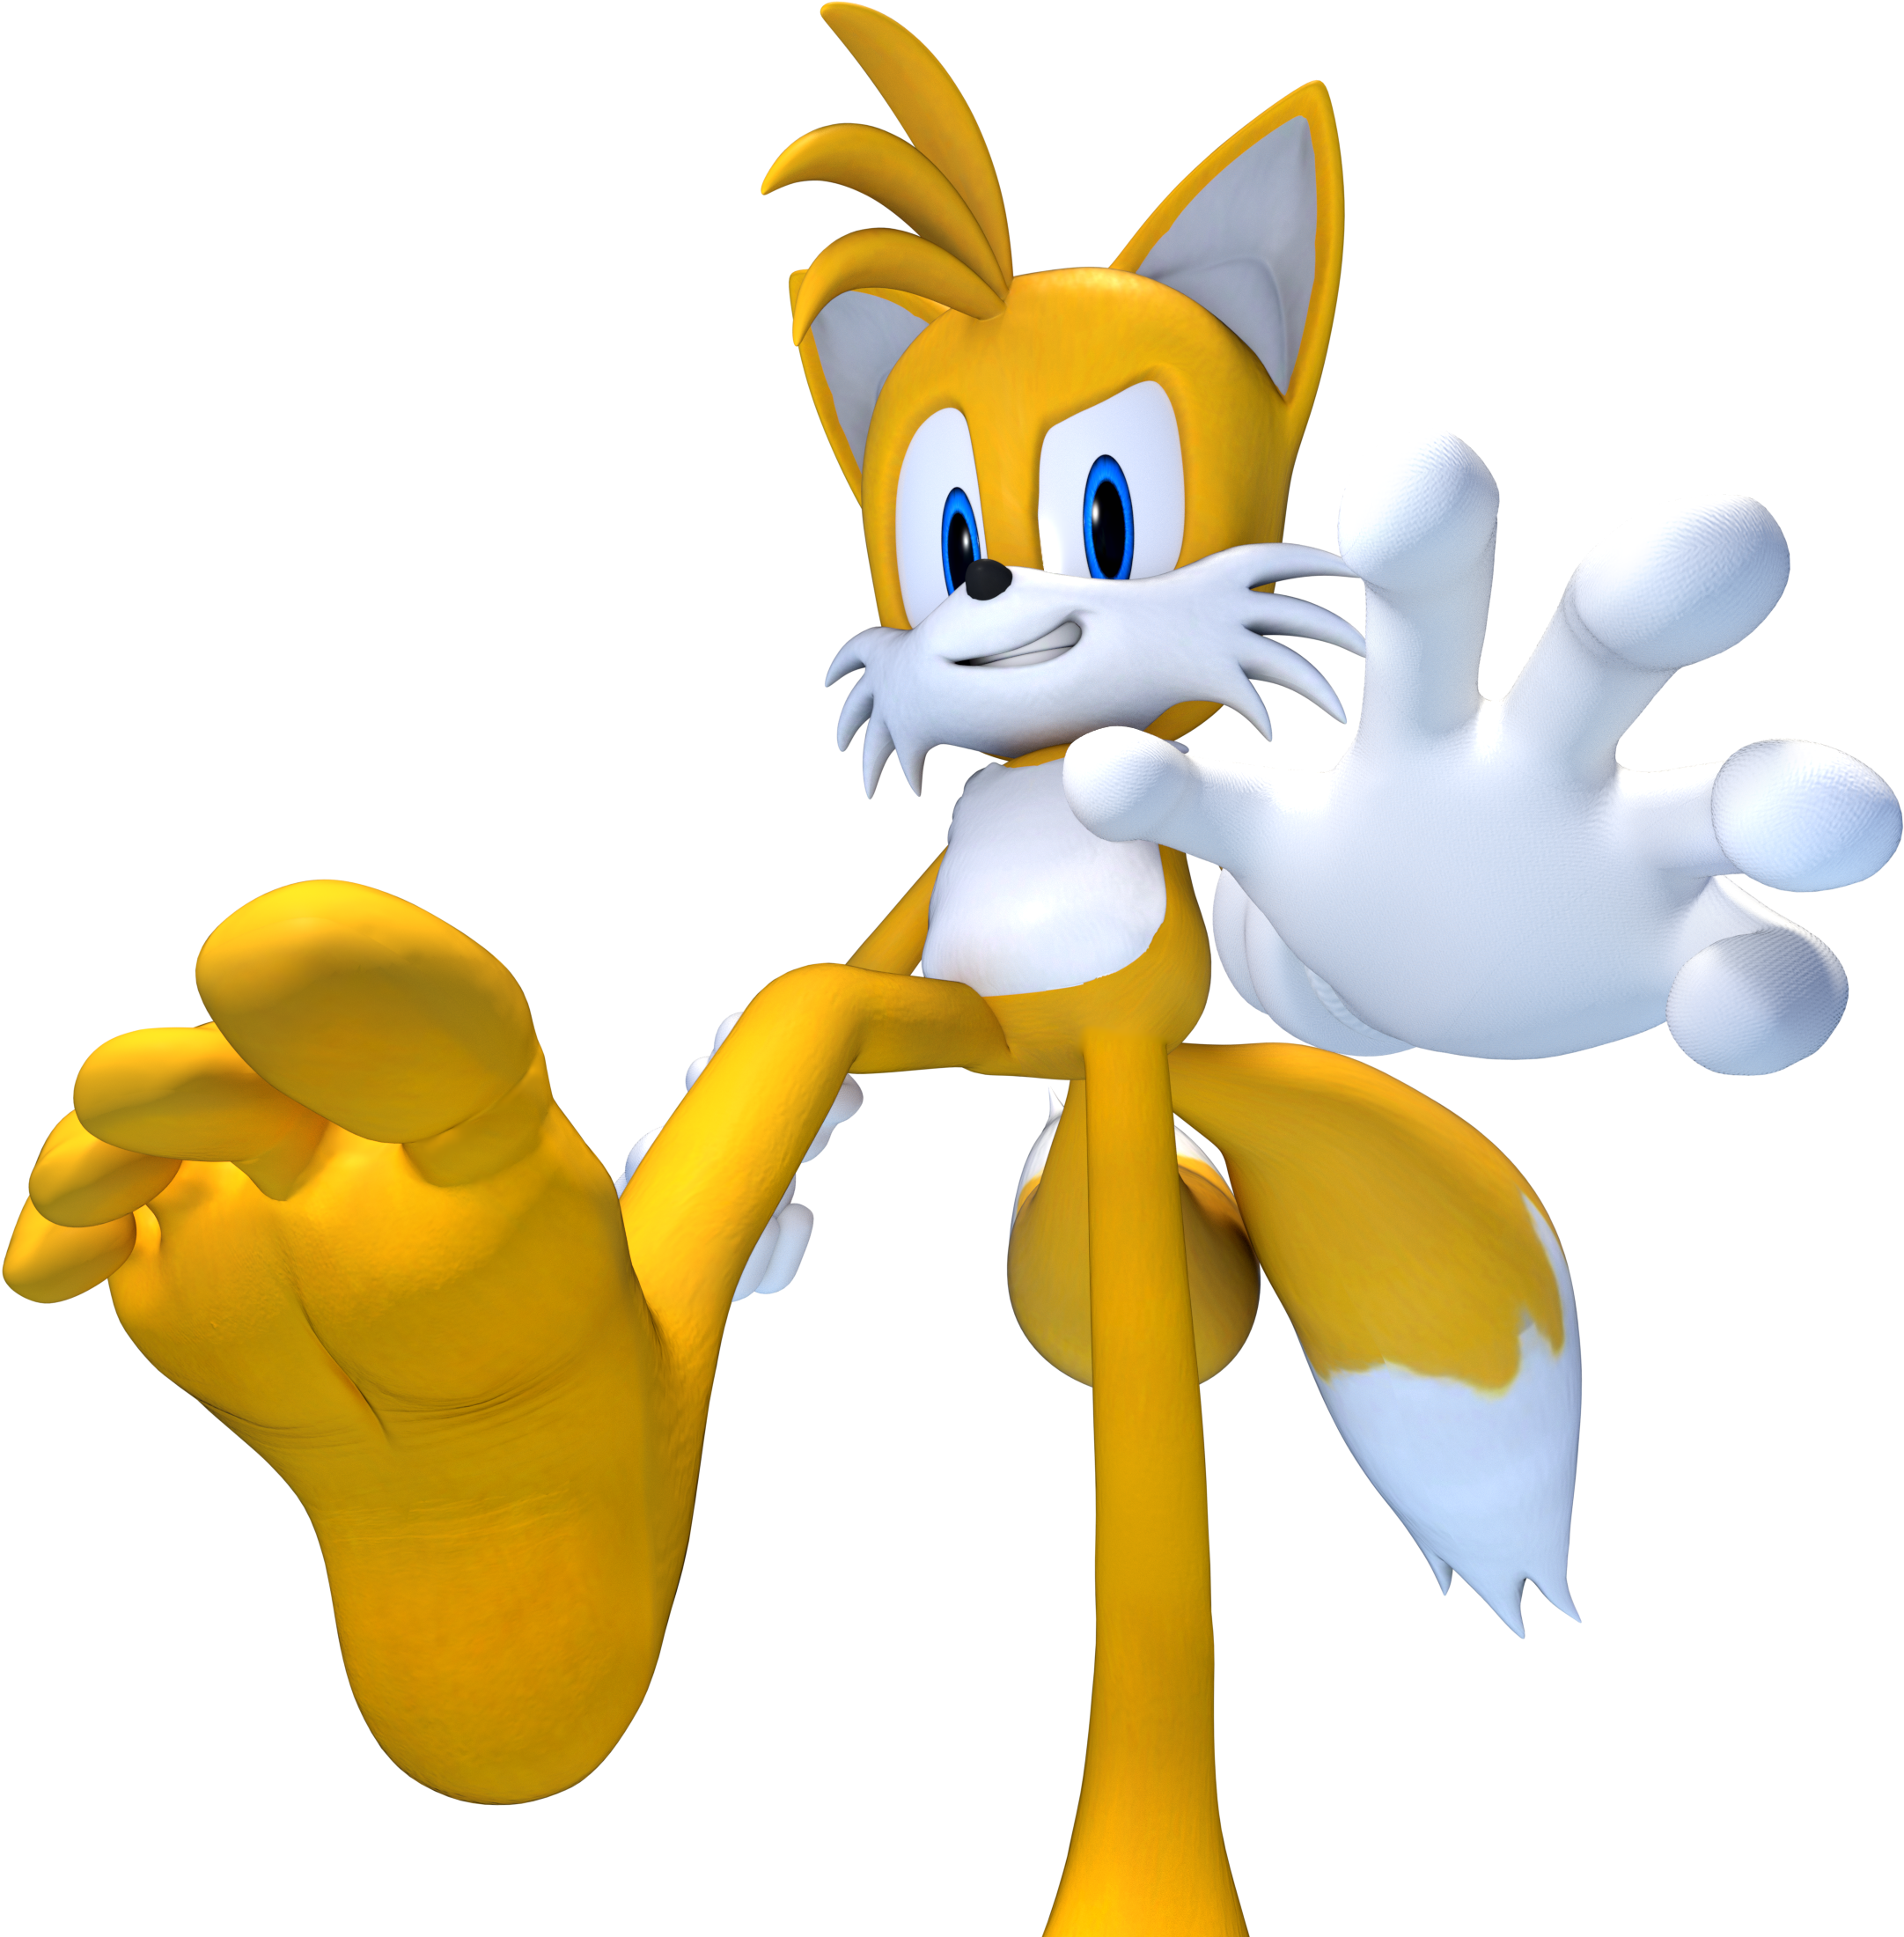 Tails The Giant By Feetymcfoot - Tails The Fox Feet.